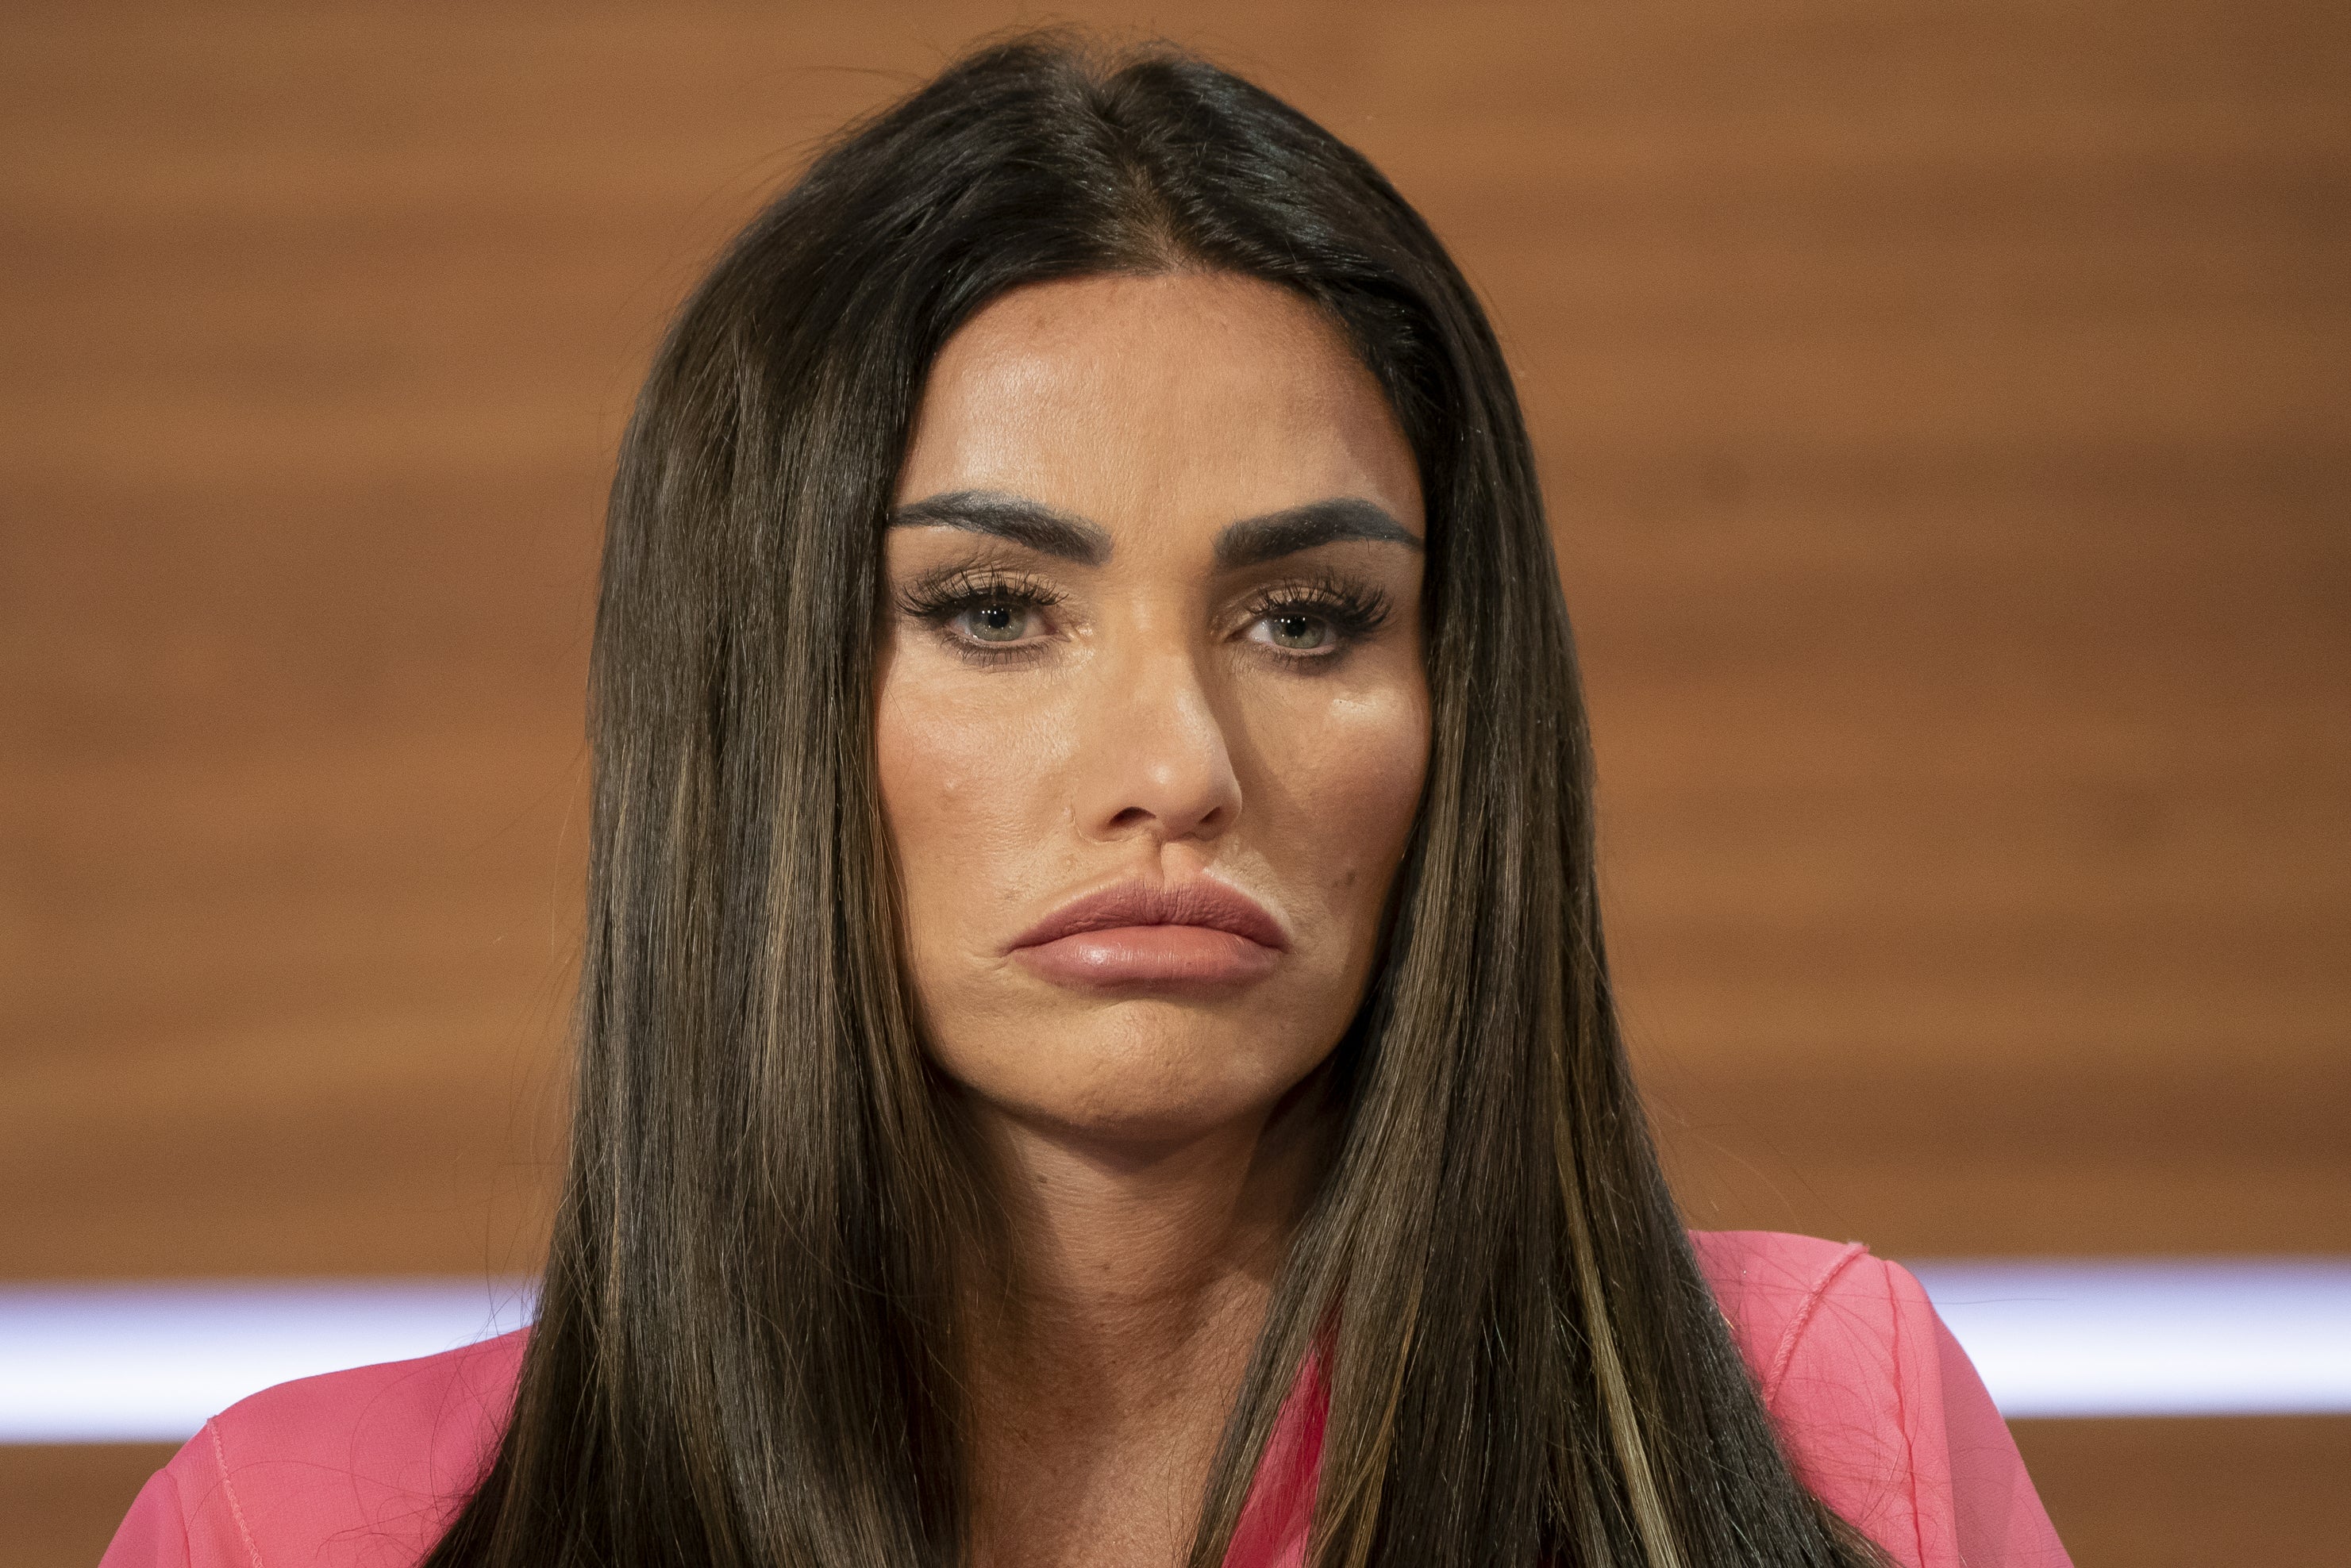 Katie Price said she wants to educate young women about how “damaging” plastic surgery can be to the body